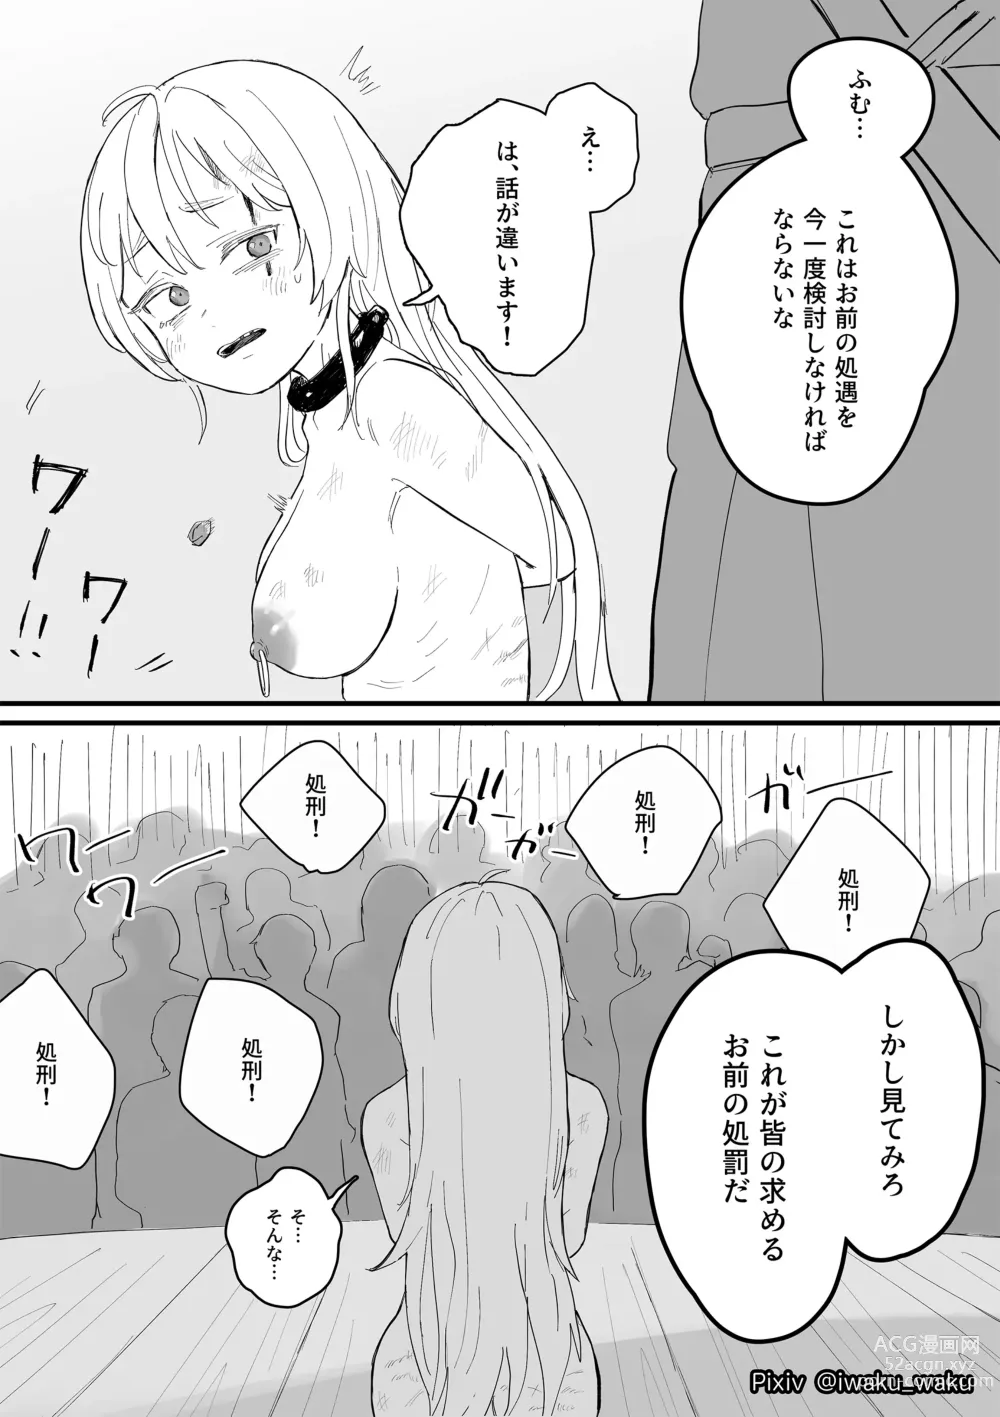 Page 3 of doujinshi Punishment for Elena